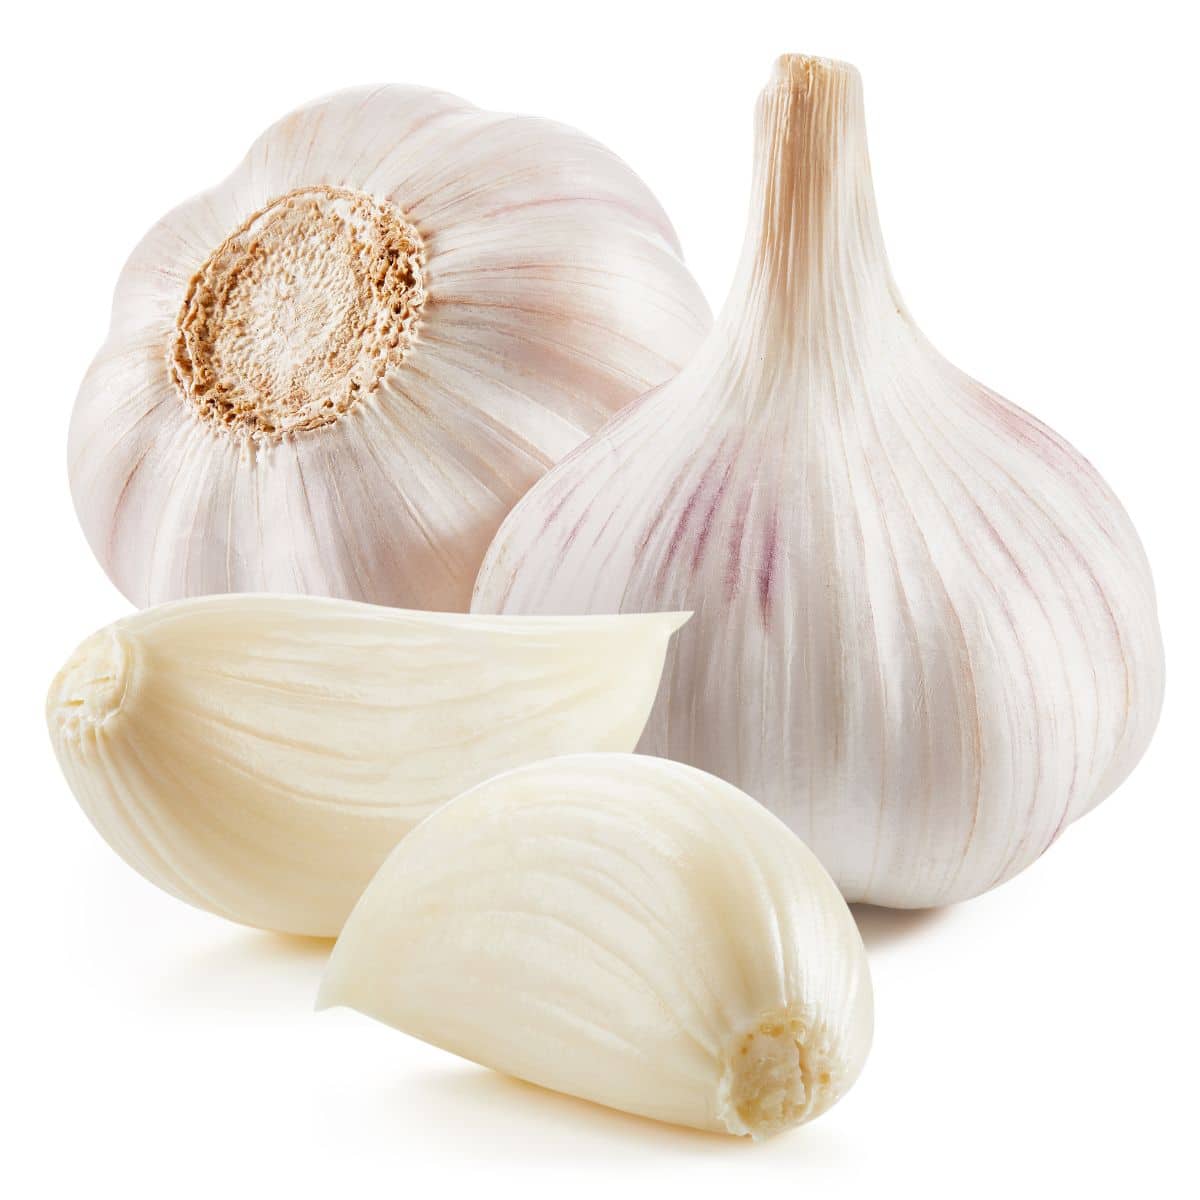 Bulgarian garlic on an isolated white background.